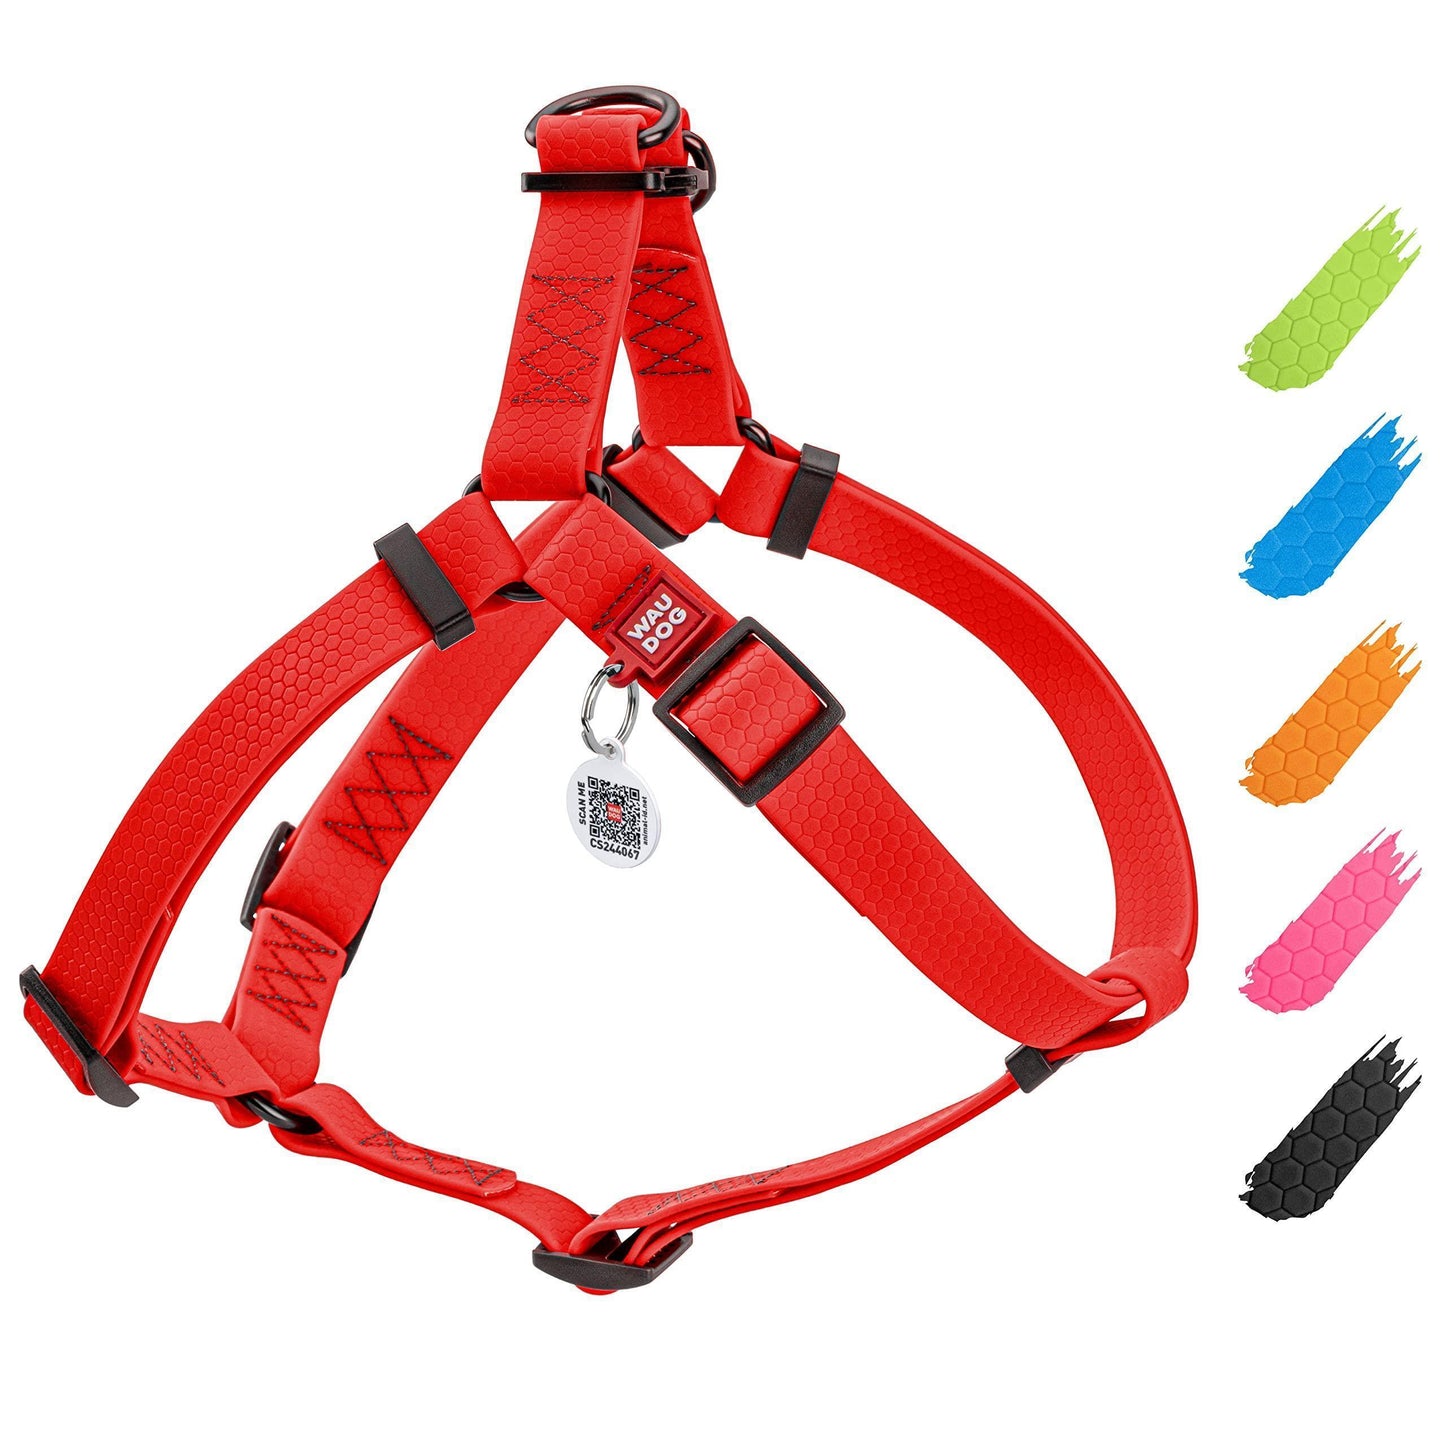 Waterproof Dog Harness Adjustable for Medium Dogs Heavy Duty Harness with Durable Metal Clasp Red Color M Size 20-32 inch